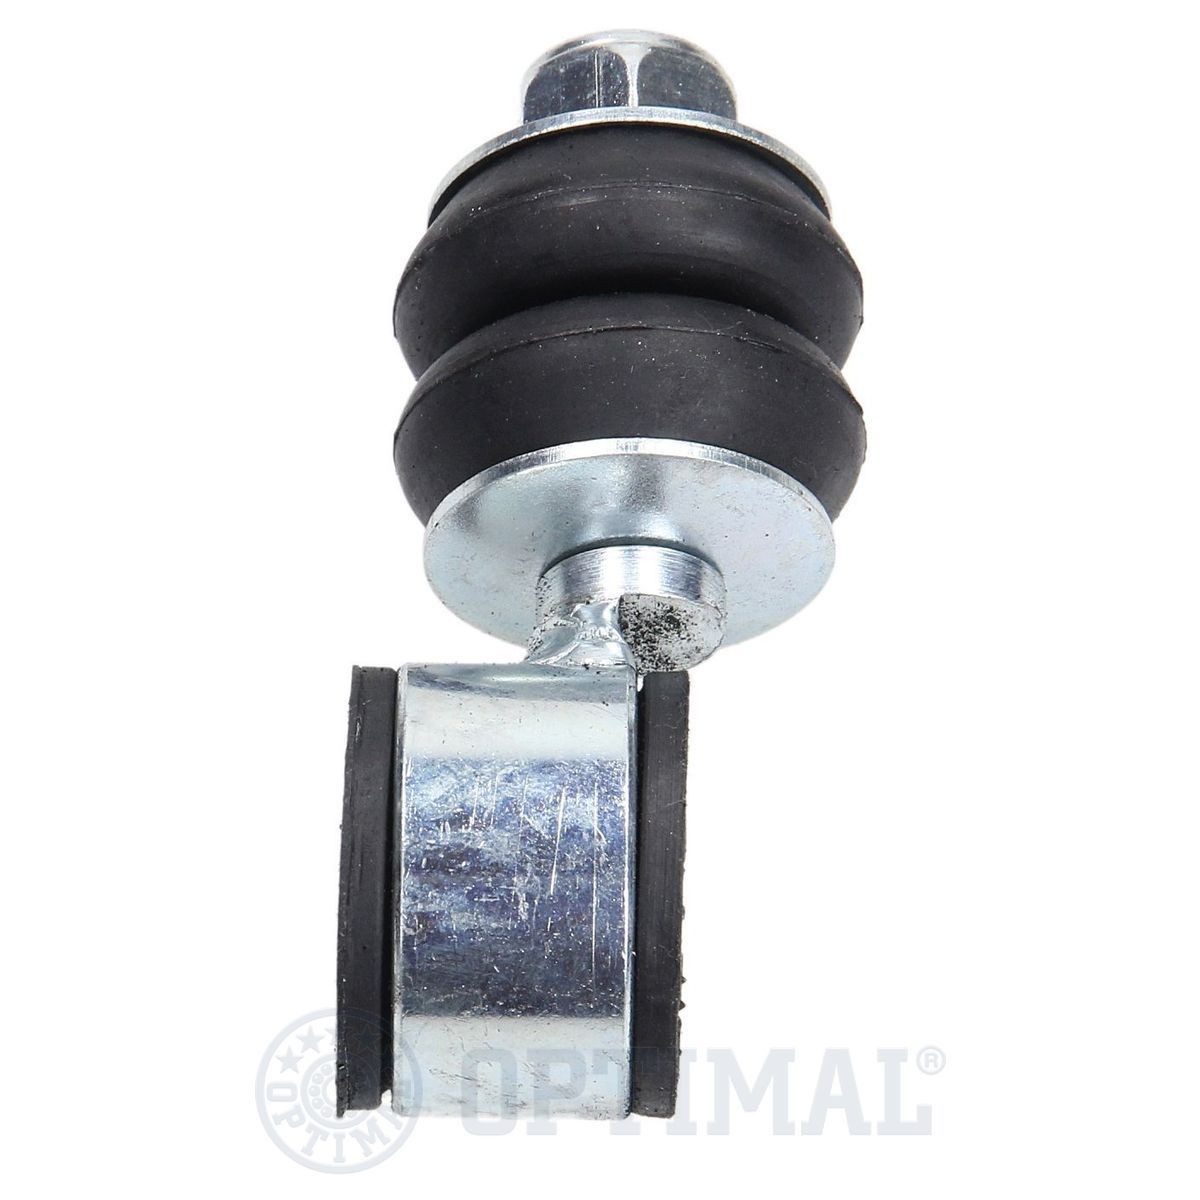 G71416 Anti-roll bar links OPTIMAL G7-1416 review and test